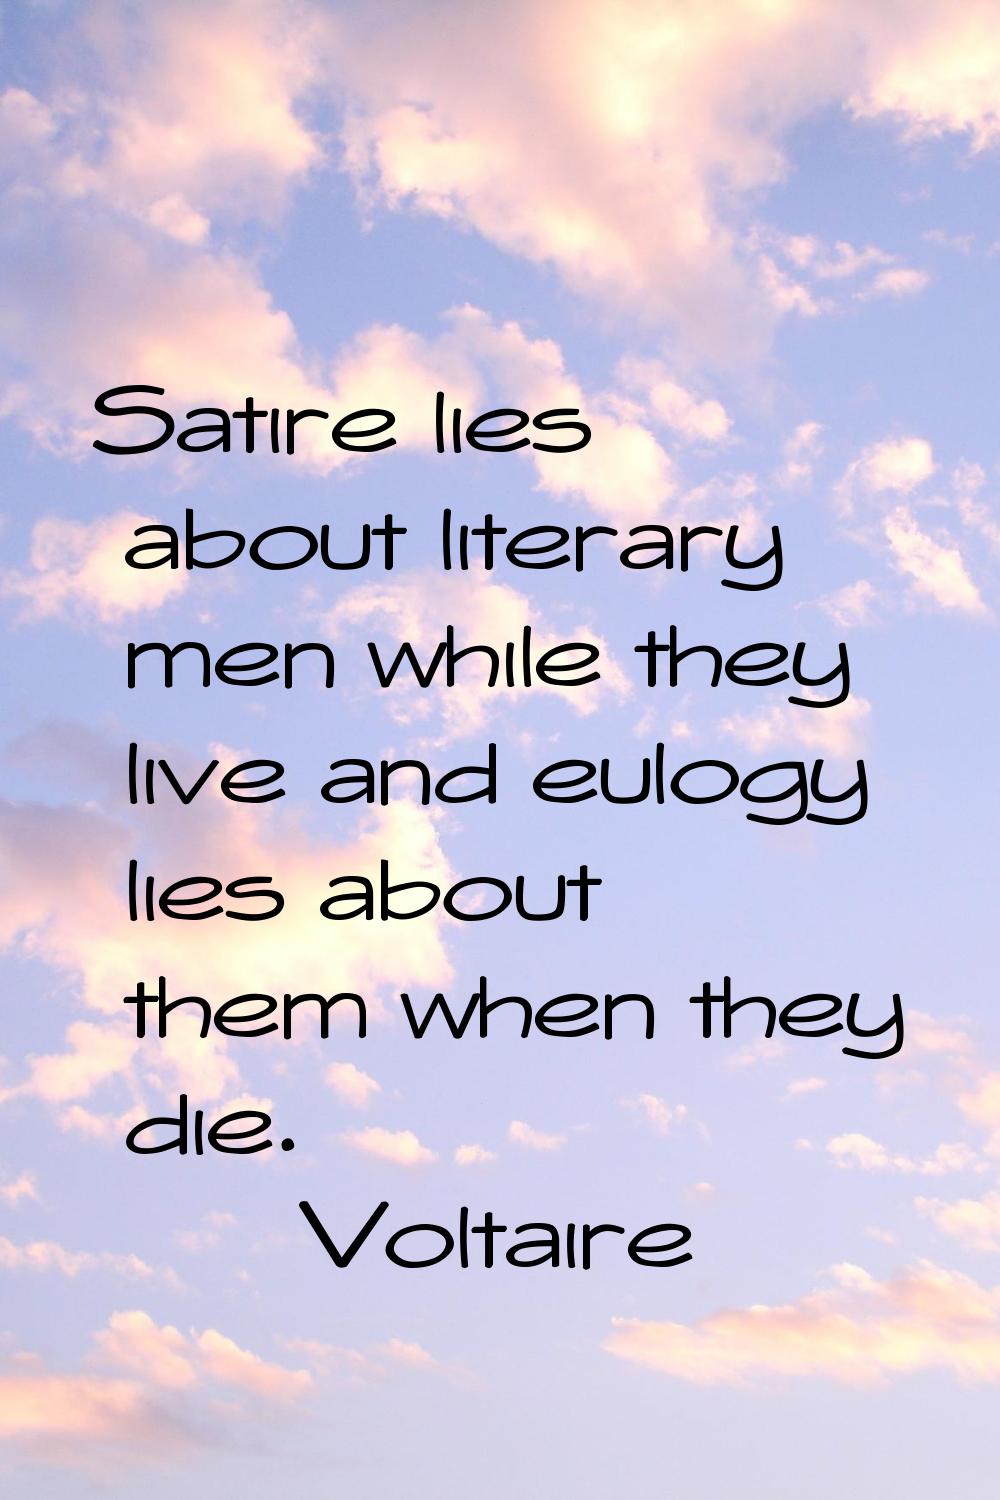 Satire lies about literary men while they live and eulogy lies about them when they die.